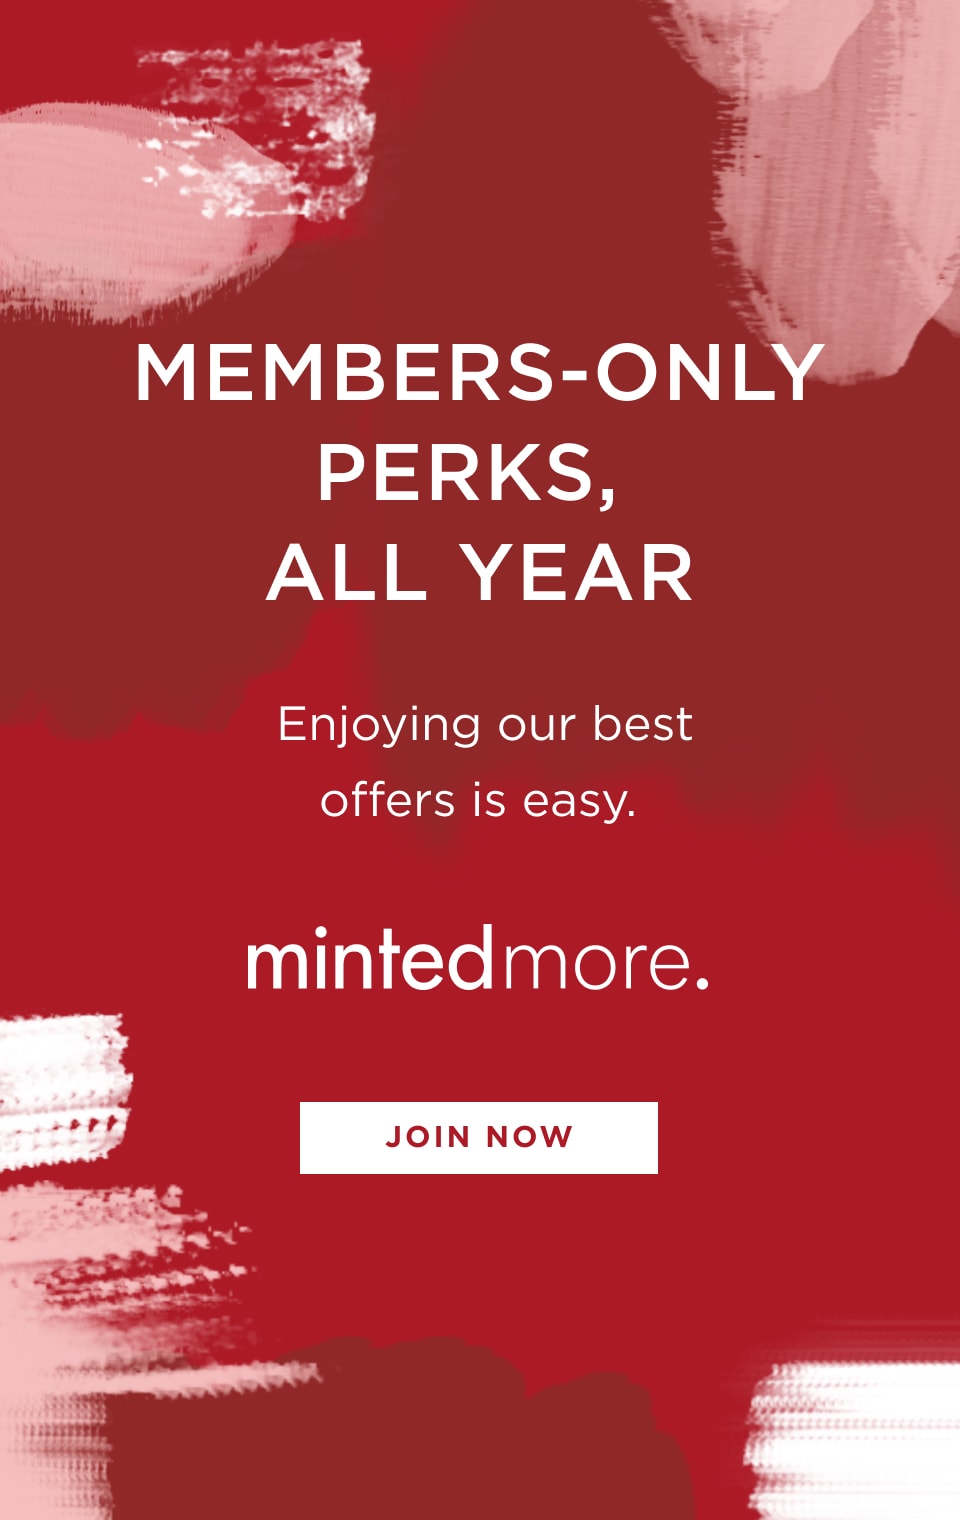 Join Minted More